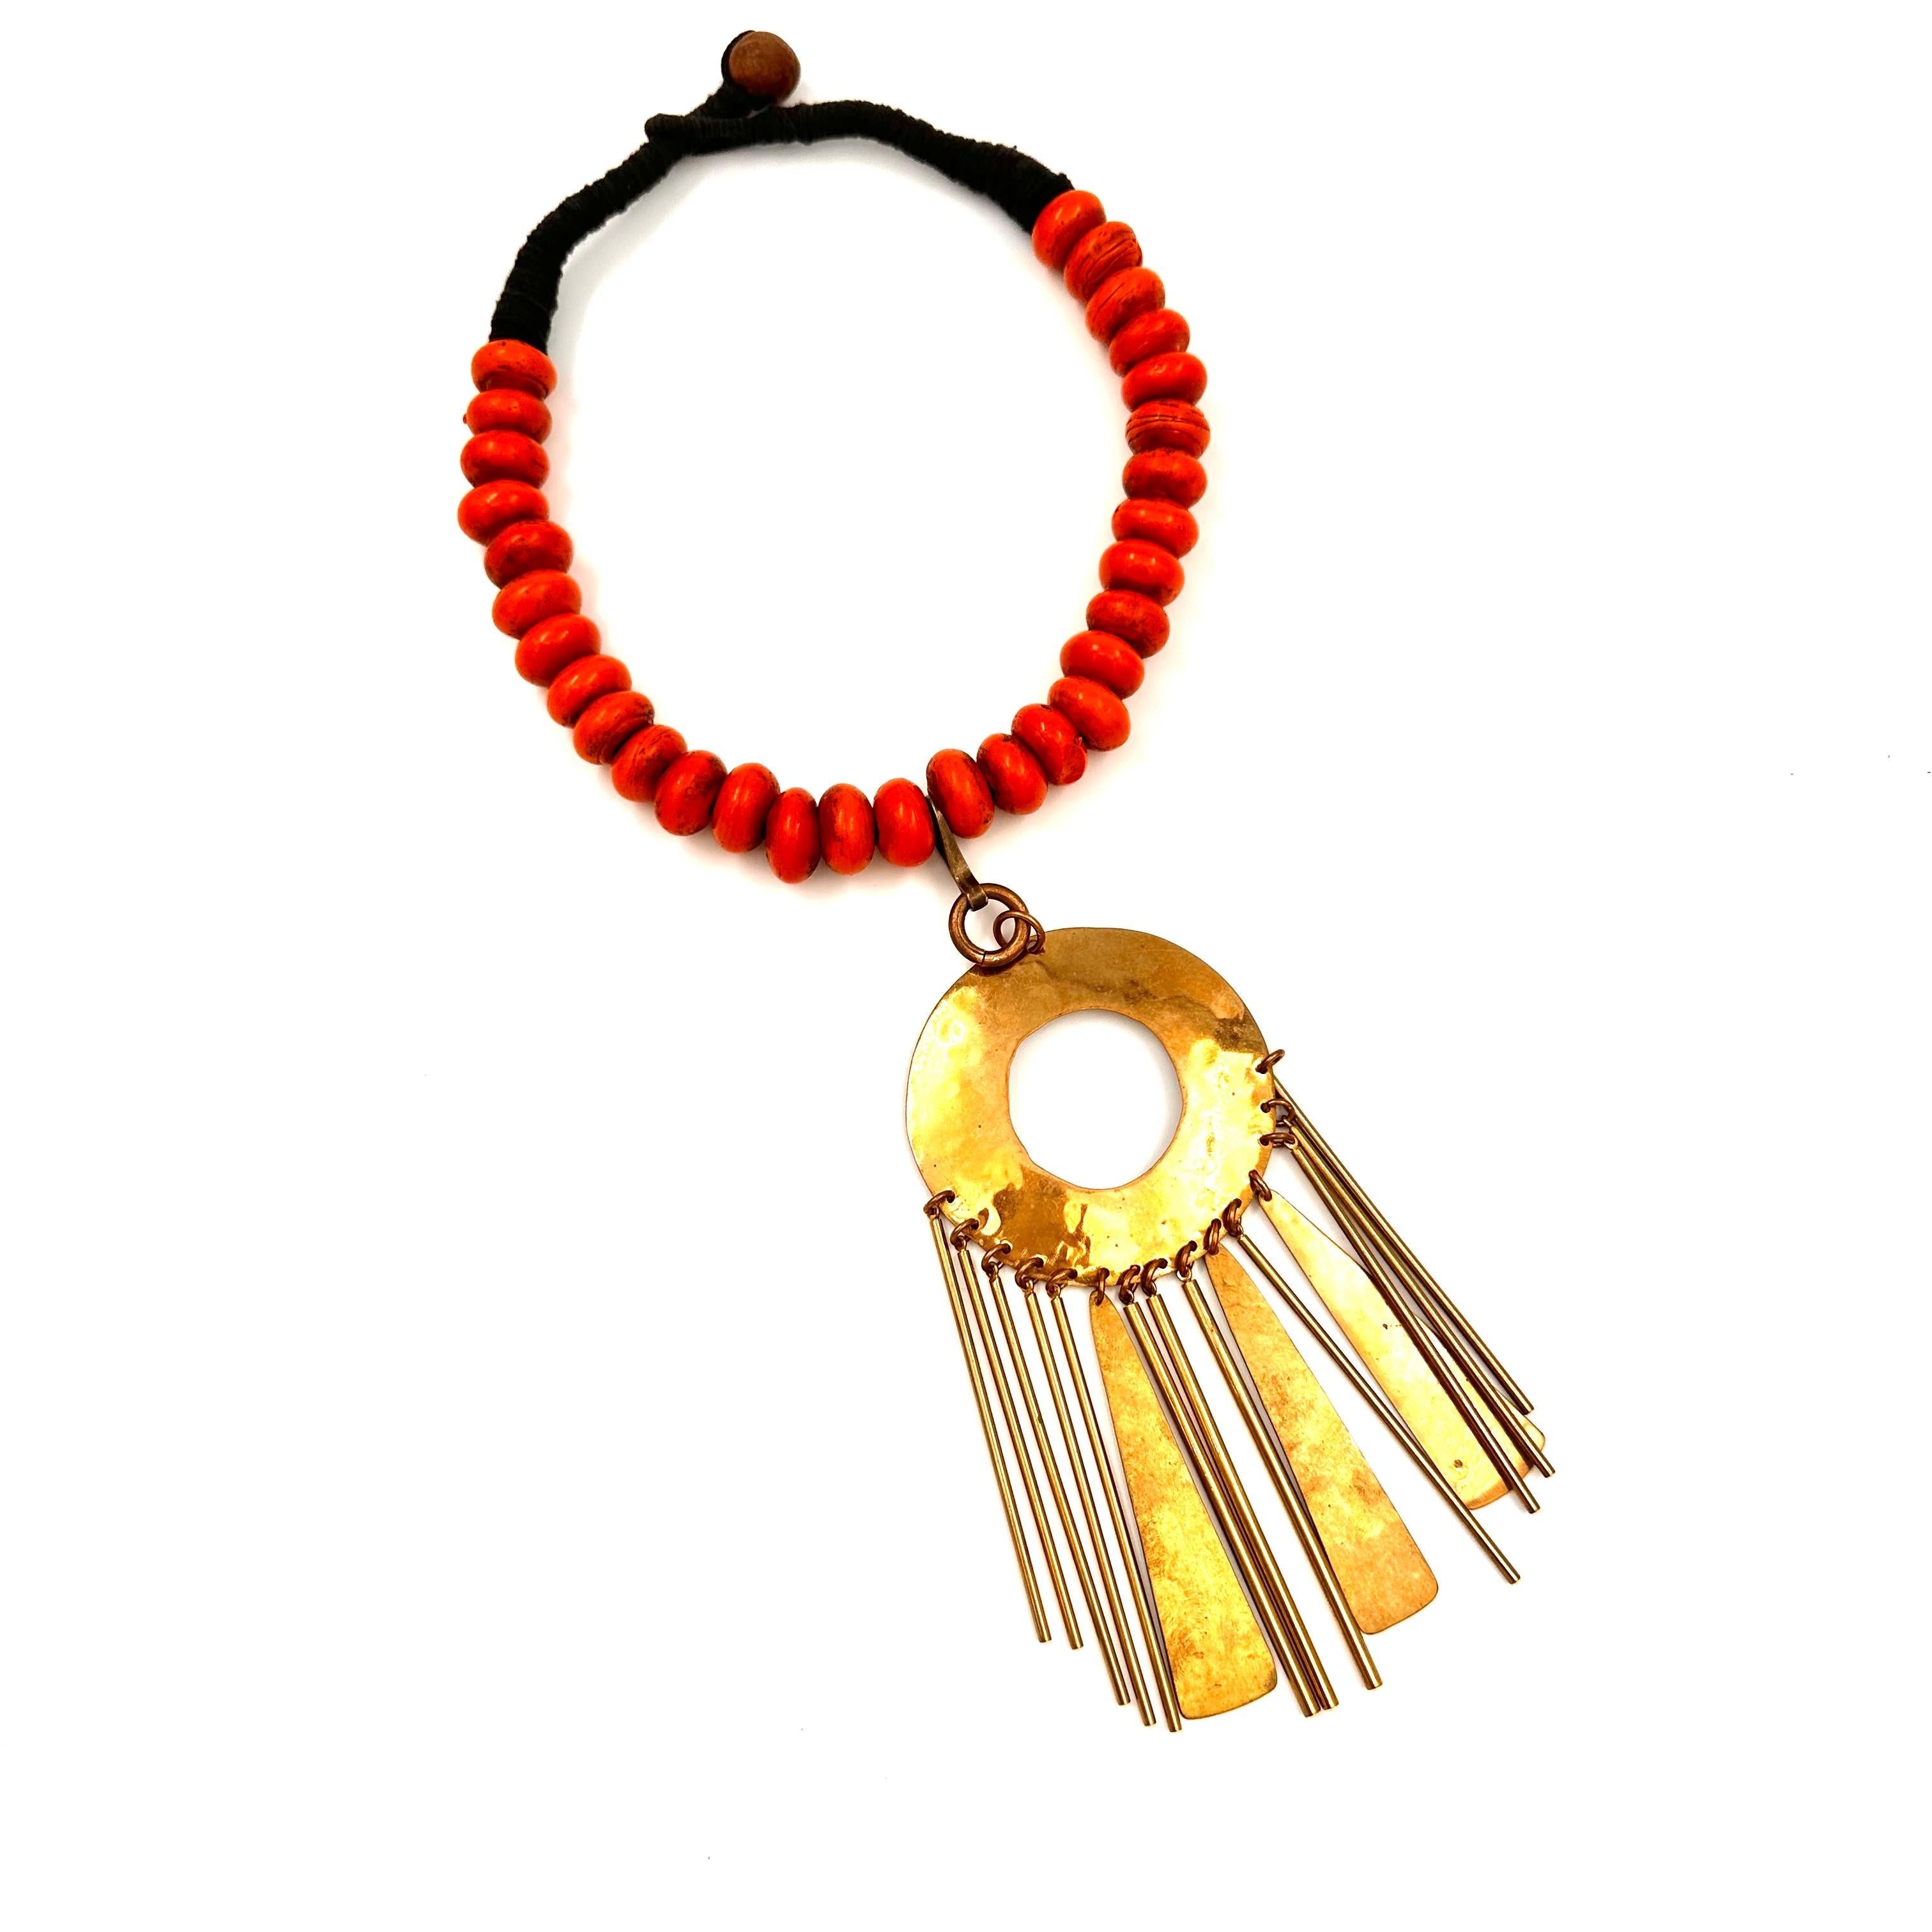 Robert Lee Morris Wabi Sabi Red African Bead Necklace With Fringed Pendant, a one of a kind neckpiece created in 2009 as part of the growing Tribal collections in the archive library. Wonderful to mix this colorful necklace with a variety of other